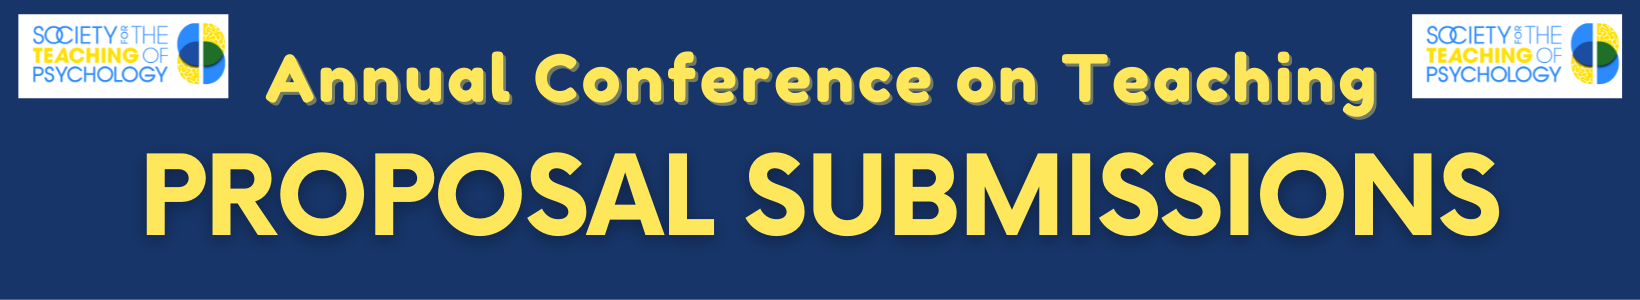 Annual Conference on Teaching Proposal Submissions